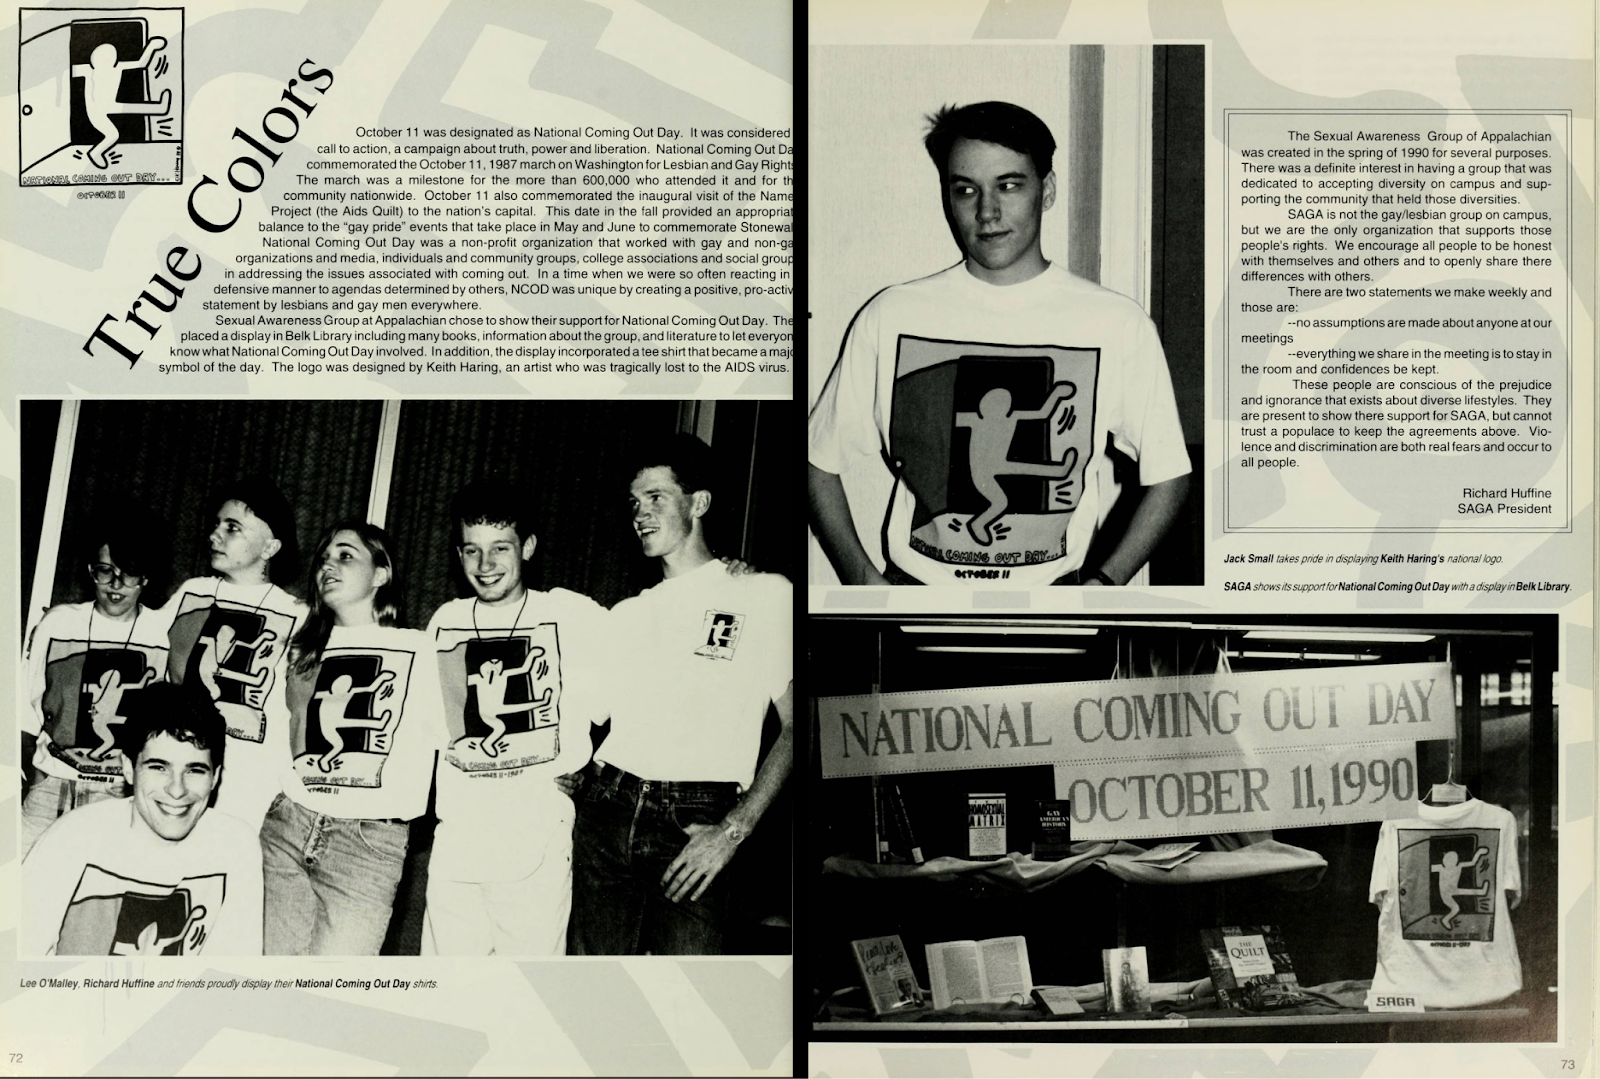 Pages from the 1991 Rhododendron on National Coming Out Day